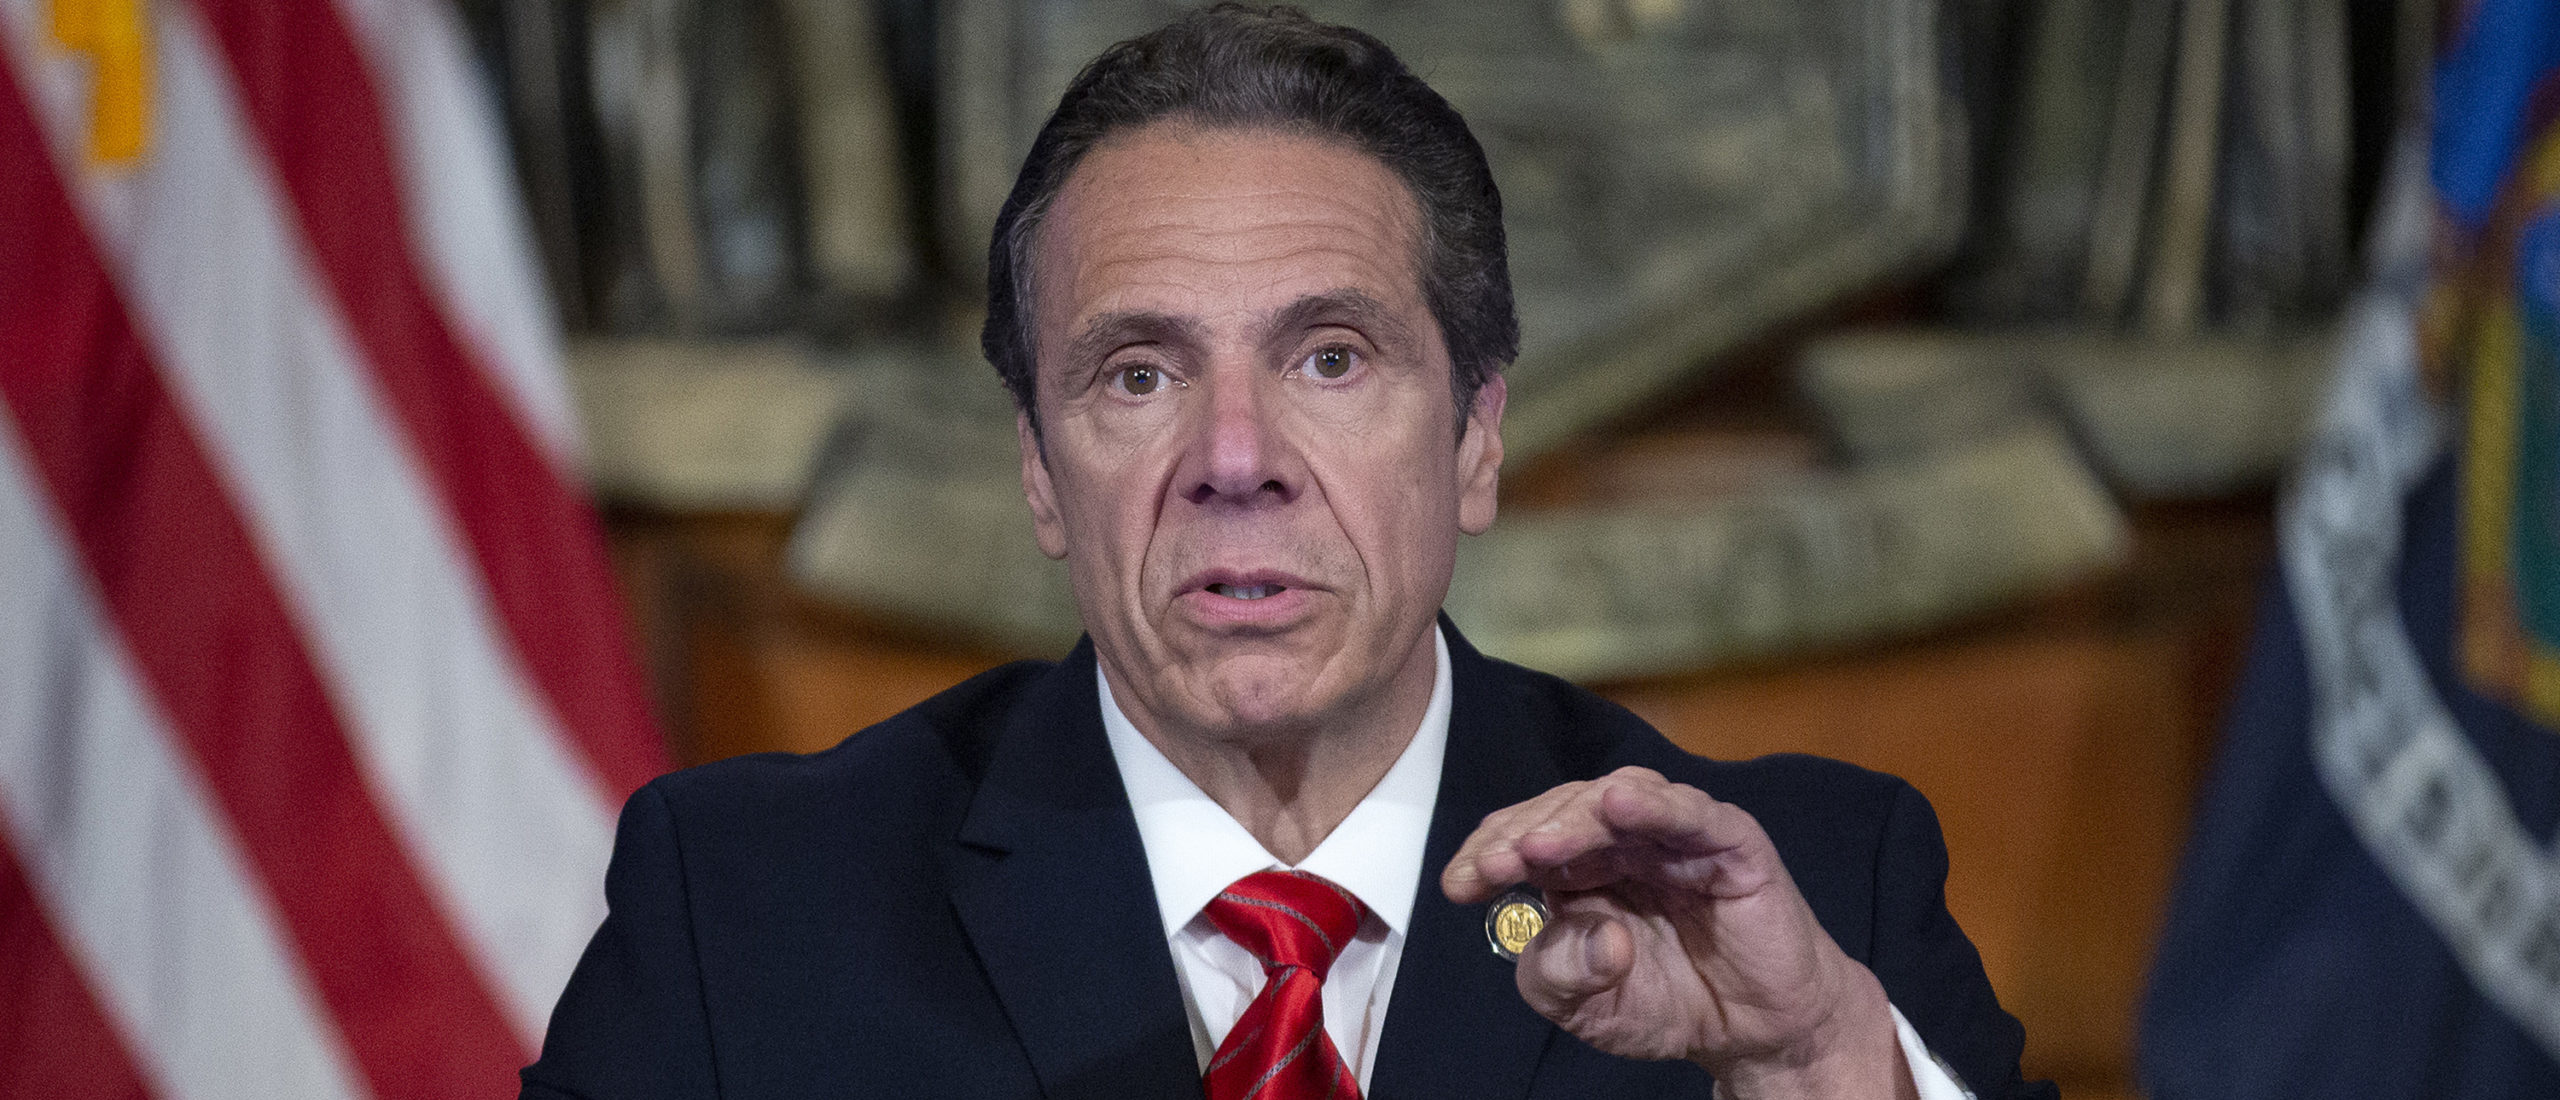 ALBANY, NY - MAY 01: New York State Governor Andrew Cuomo speaks during his daily press briefing on May 1, 2020 in Albany, New York. Cuomo stated that New York will eliminate deductibles for mental health services for frontline workers. (Photo by Stefani Reynolds/Getty Images)